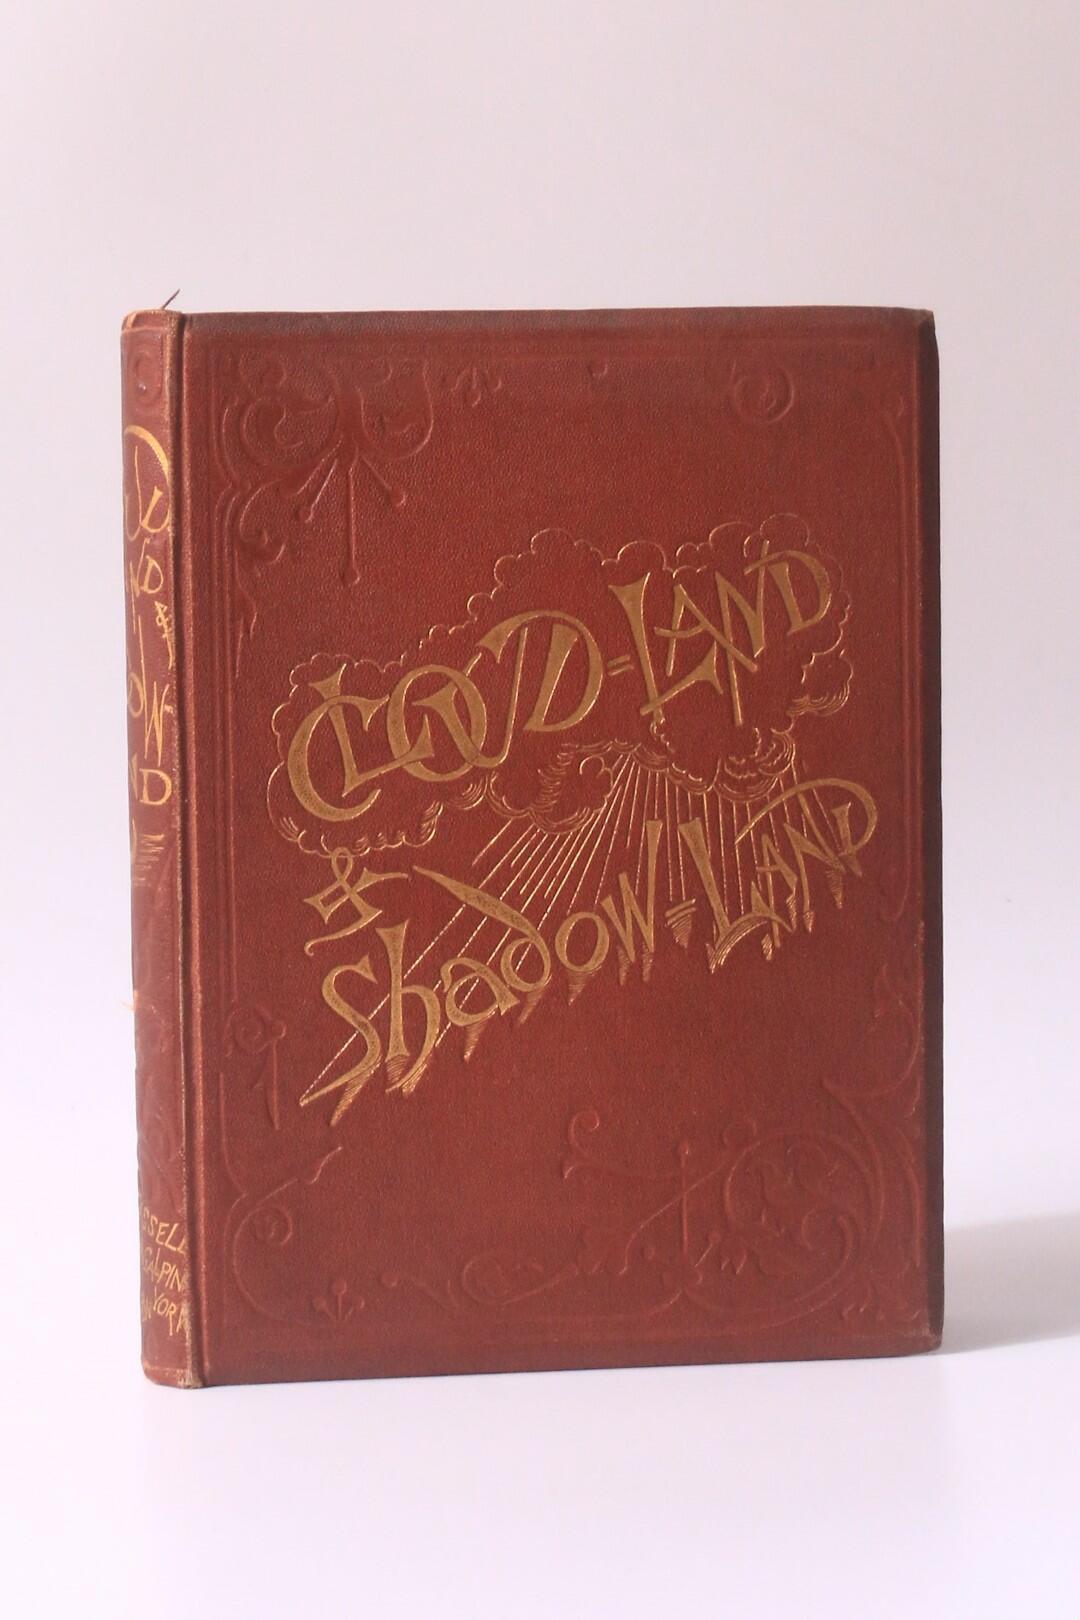 John Thackray Bunce - Cloudland and Shadowland - Cassell, Petter and Galpin, nd [1886], First Edition.